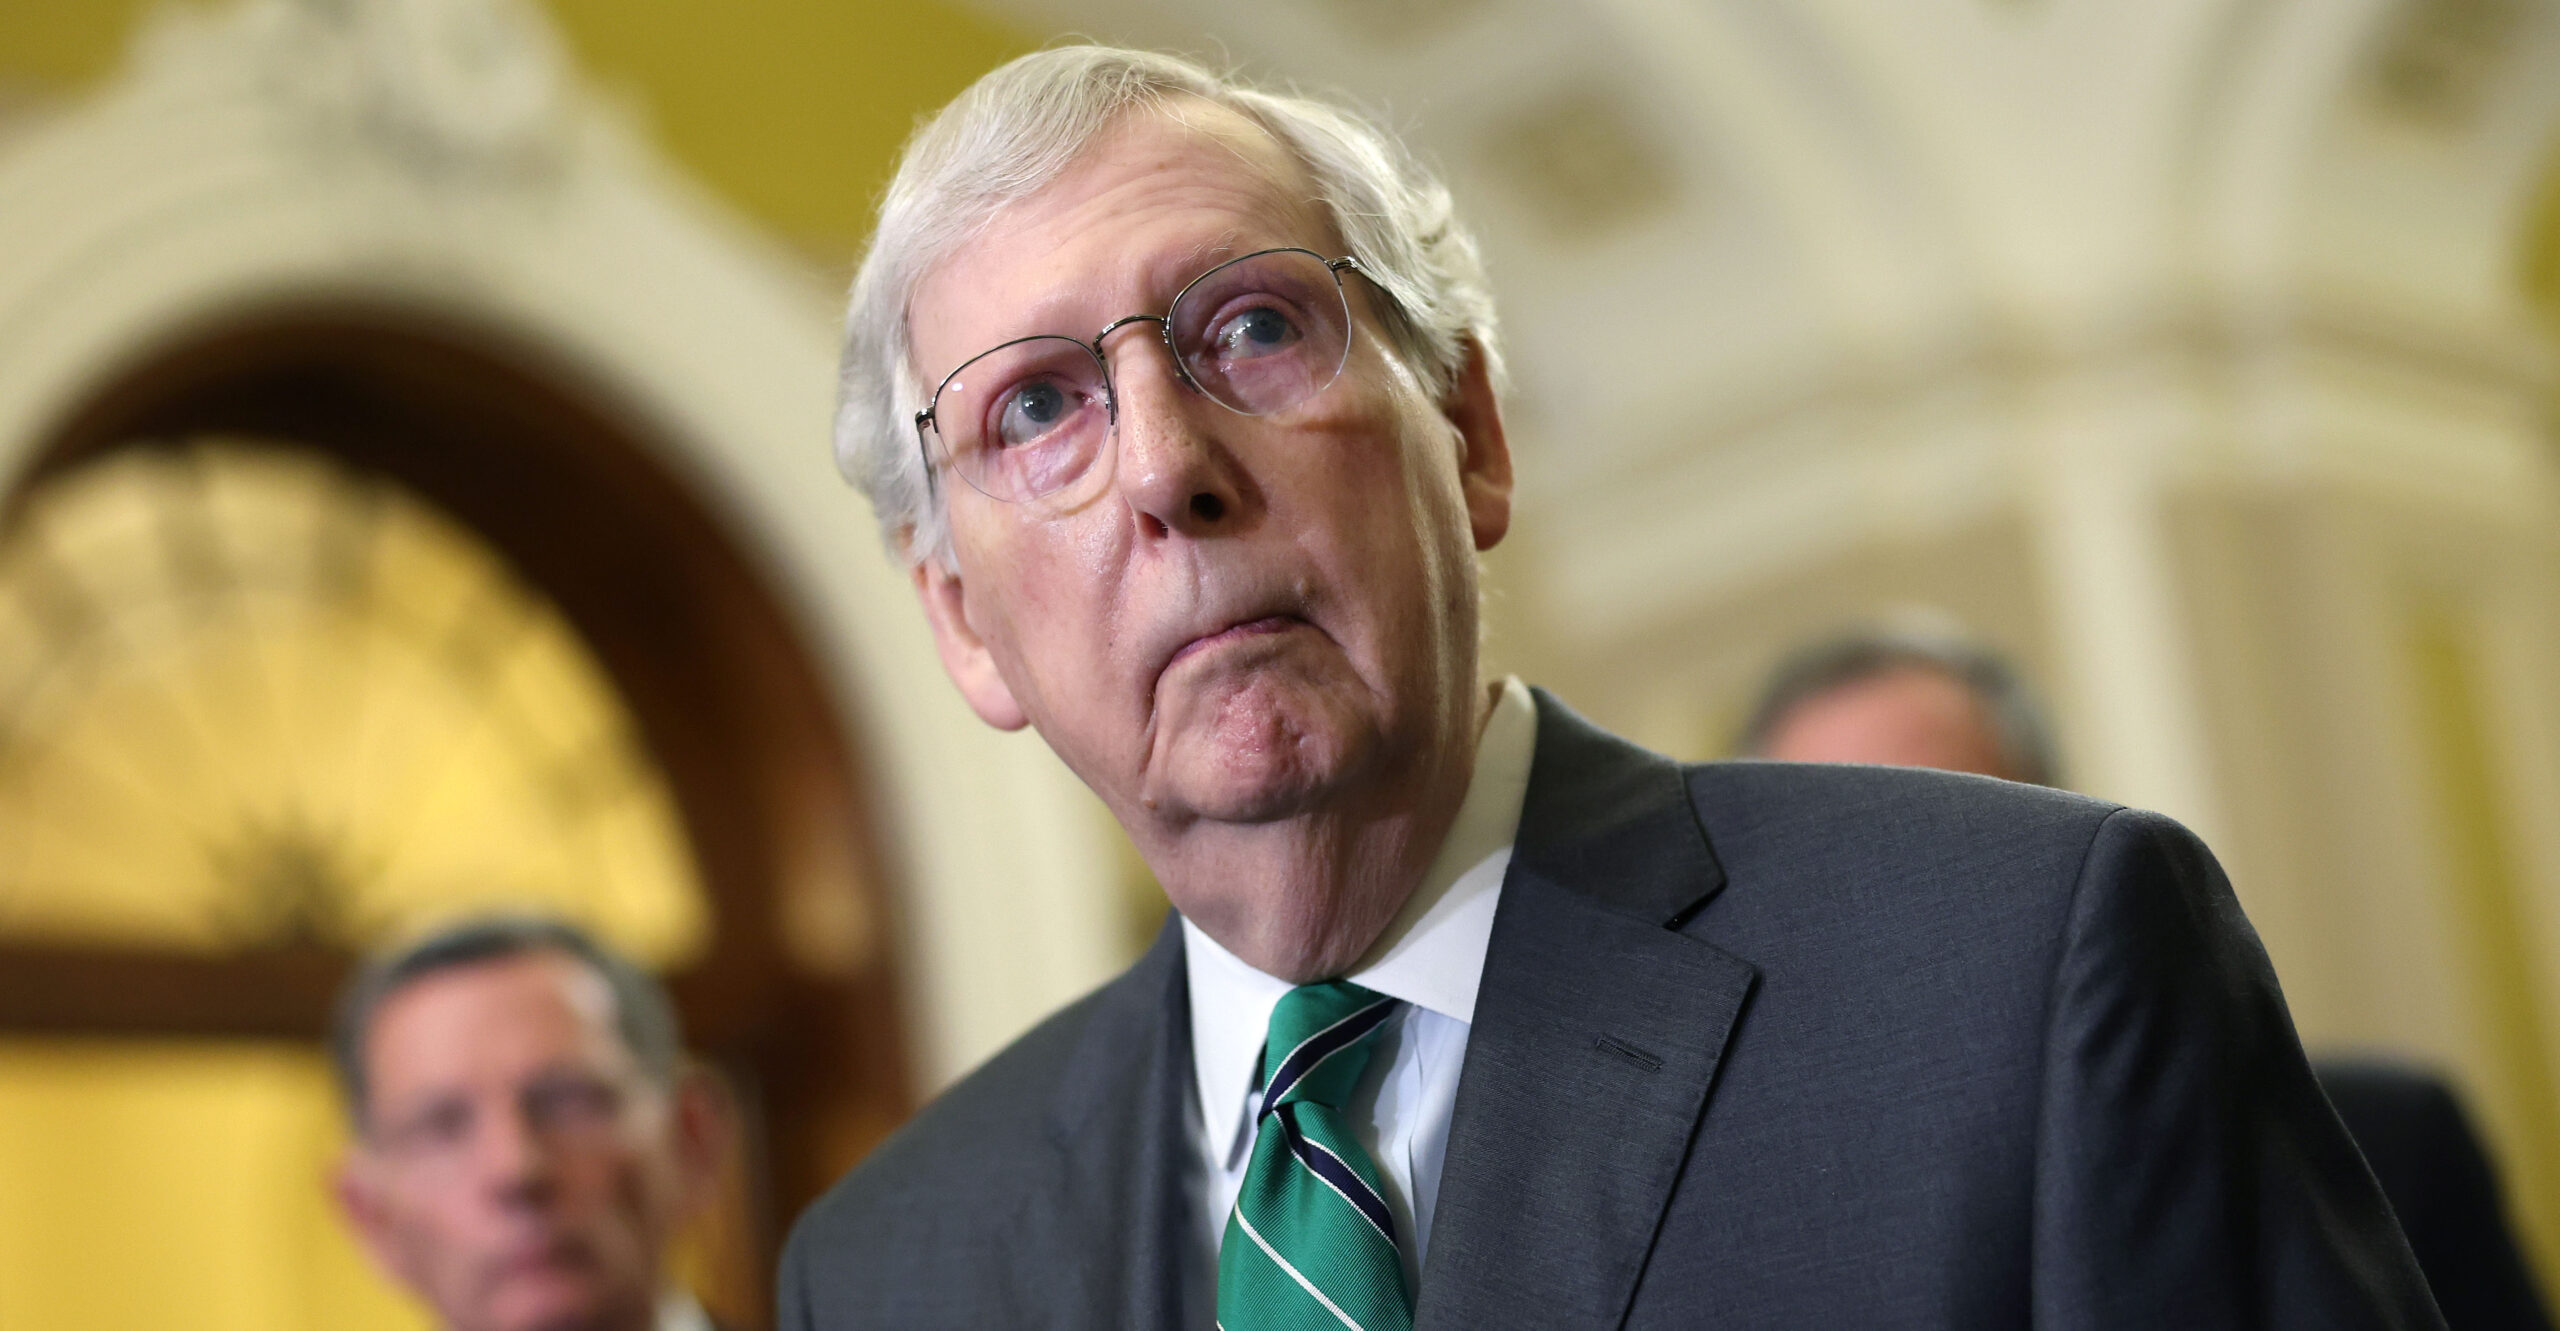 ICYMI: Mitch McConnell Freezes Up Again at Press Conference